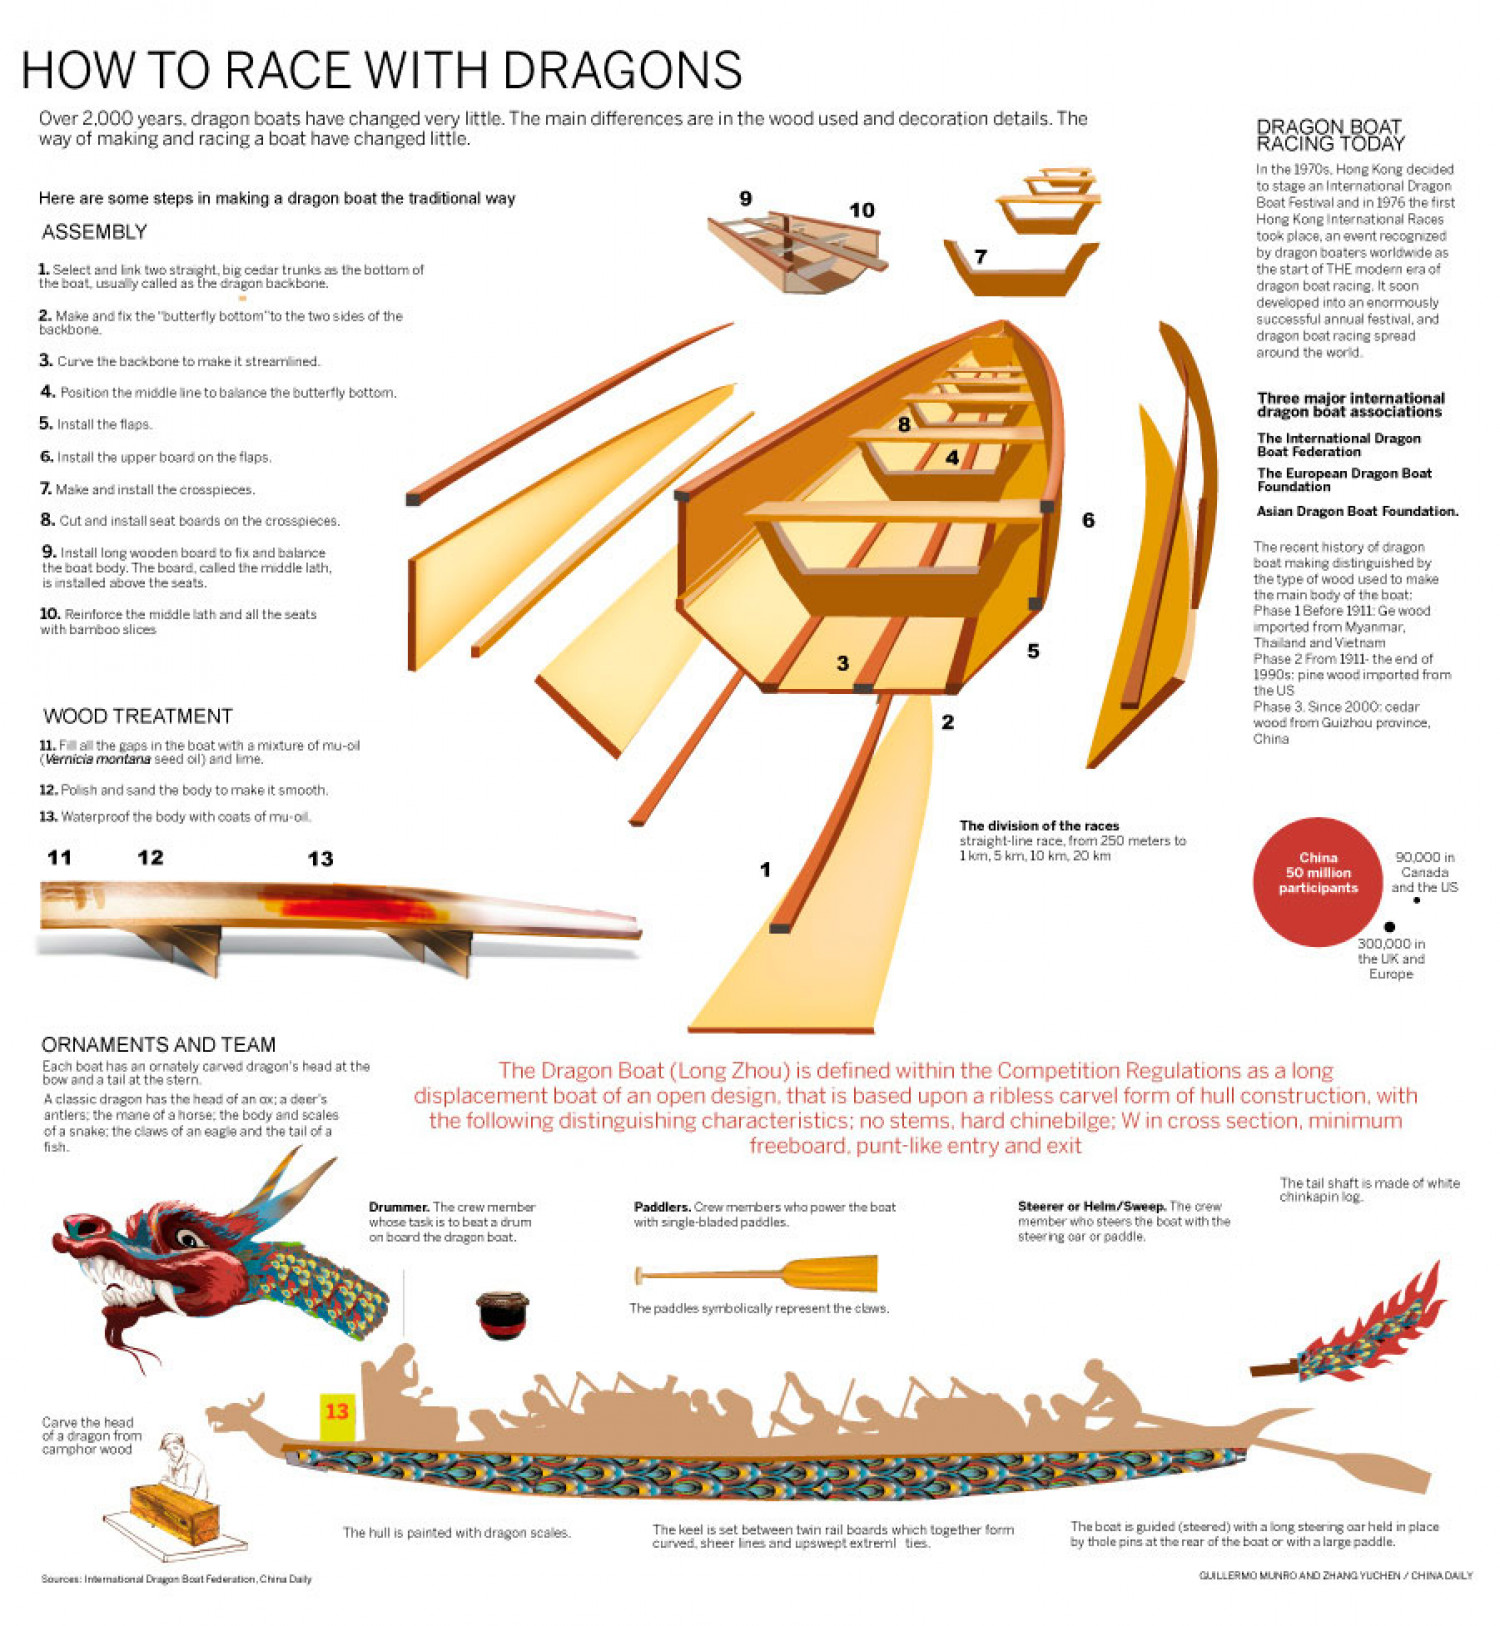 How to race with a dragon Infographic